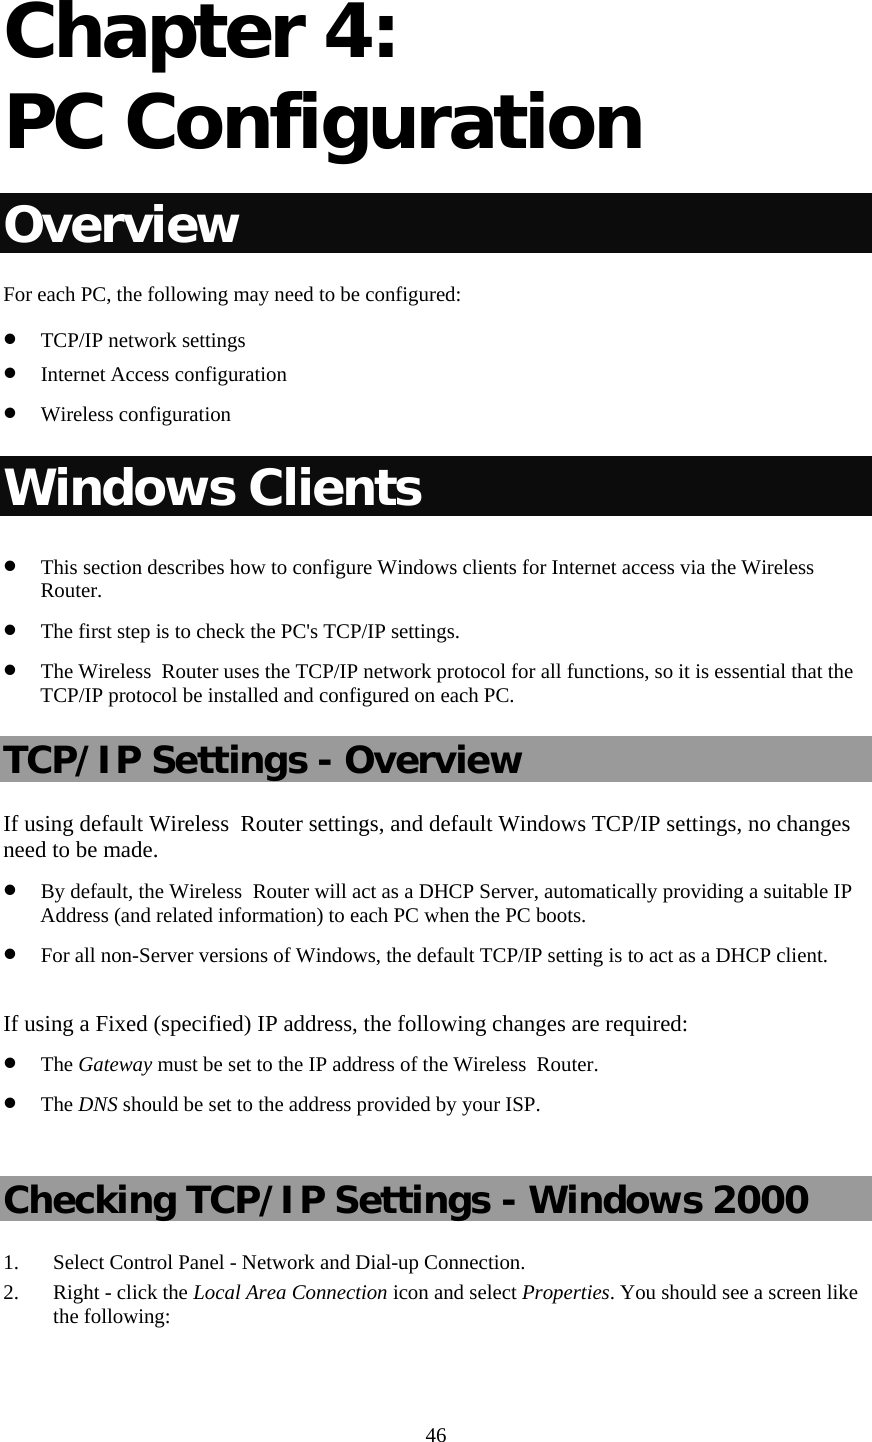   46 Chapter 4:  PC Configuration Overview For each PC, the following may need to be configured: • TCP/IP network settings • Internet Access configuration • Wireless configuration Windows Clients • This section describes how to configure Windows clients for Internet access via the Wireless  Router. • The first step is to check the PC&apos;s TCP/IP settings.  • The Wireless  Router uses the TCP/IP network protocol for all functions, so it is essential that the TCP/IP protocol be installed and configured on each PC. TCP/IP Settings - Overview If using default Wireless  Router settings, and default Windows TCP/IP settings, no changes need to be made. • By default, the Wireless  Router will act as a DHCP Server, automatically providing a suitable IP Address (and related information) to each PC when the PC boots. • For all non-Server versions of Windows, the default TCP/IP setting is to act as a DHCP client.  If using a Fixed (specified) IP address, the following changes are required: • The Gateway must be set to the IP address of the Wireless  Router. • The DNS should be set to the address provided by your ISP.  Checking TCP/IP Settings - Windows 2000 1. Select Control Panel - Network and Dial-up Connection. 2. Right - click the Local Area Connection icon and select Properties. You should see a screen like the following: 